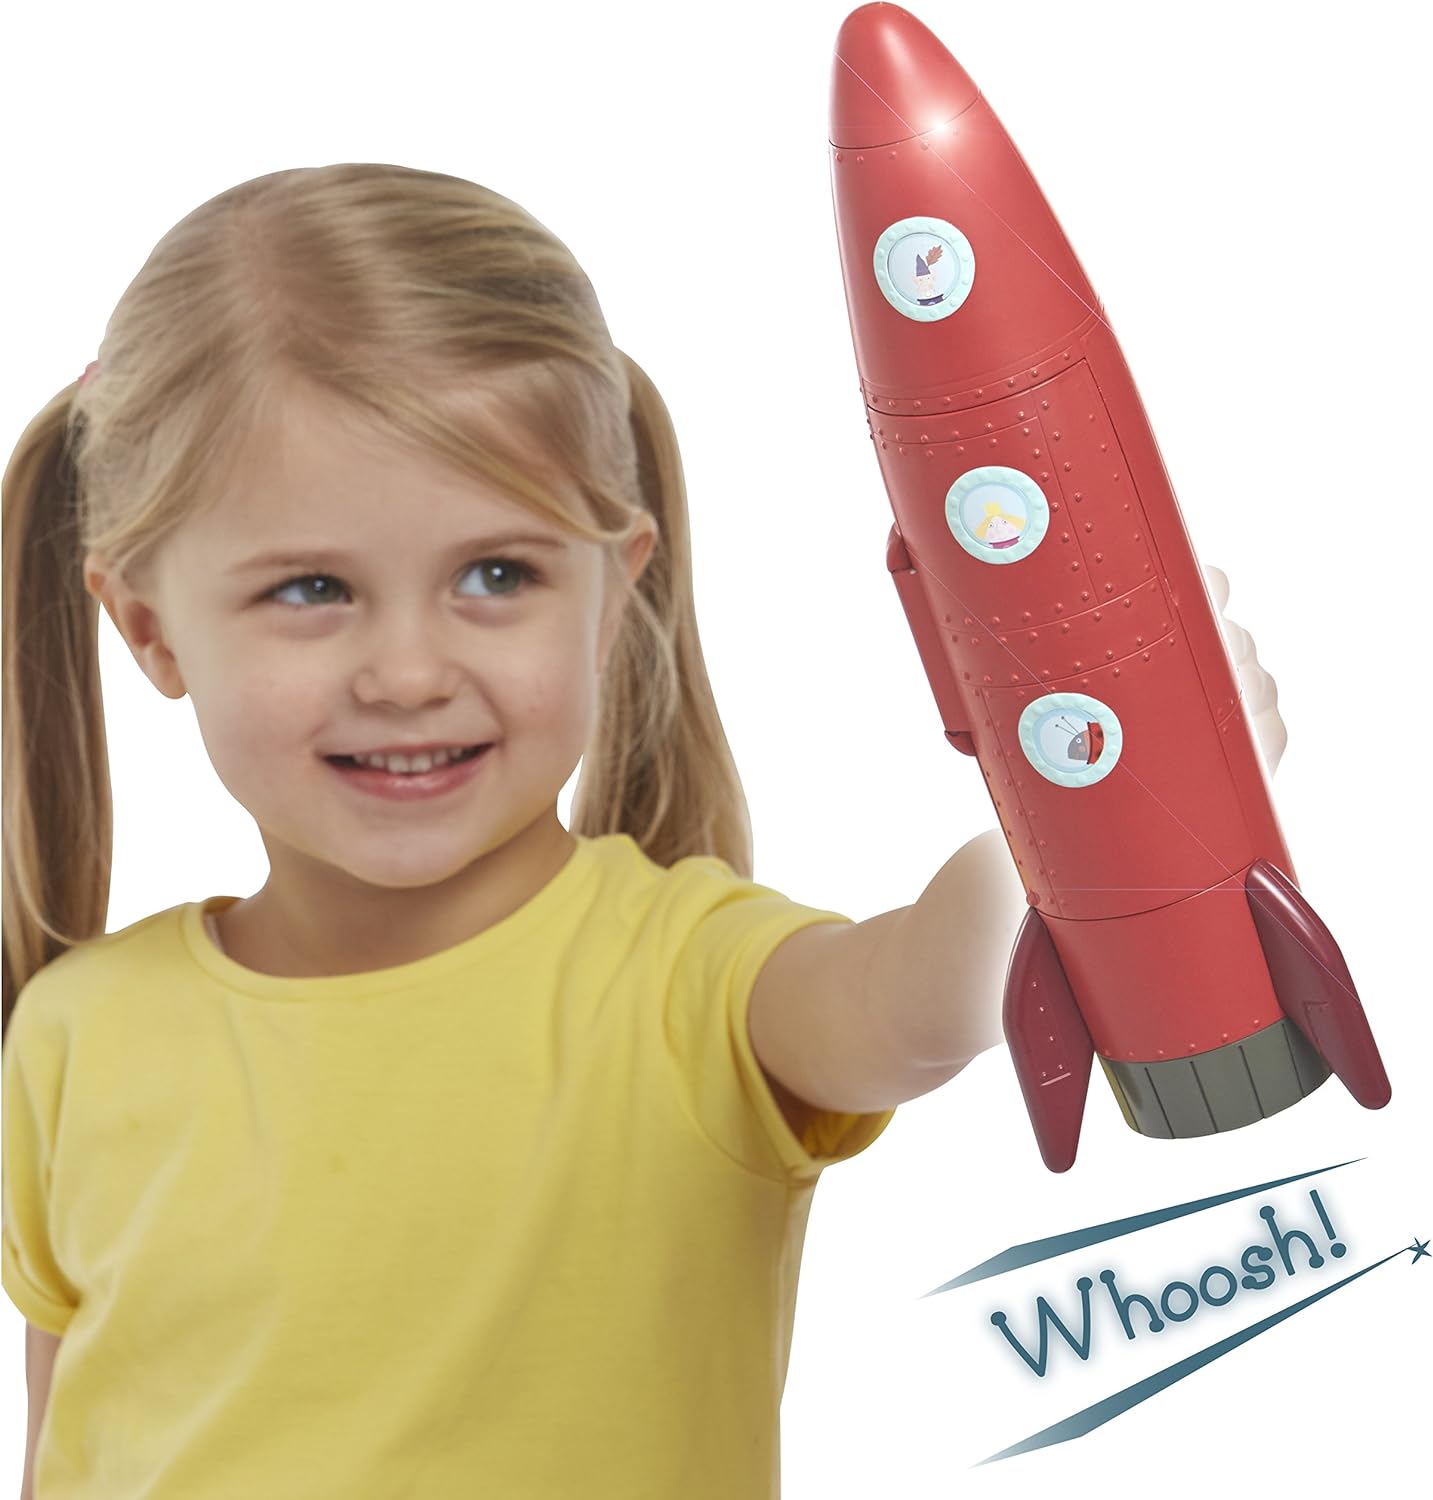 Ben & Holly Electronic Lights and Sounds Elf Rocket Playset Includes Ben Elf